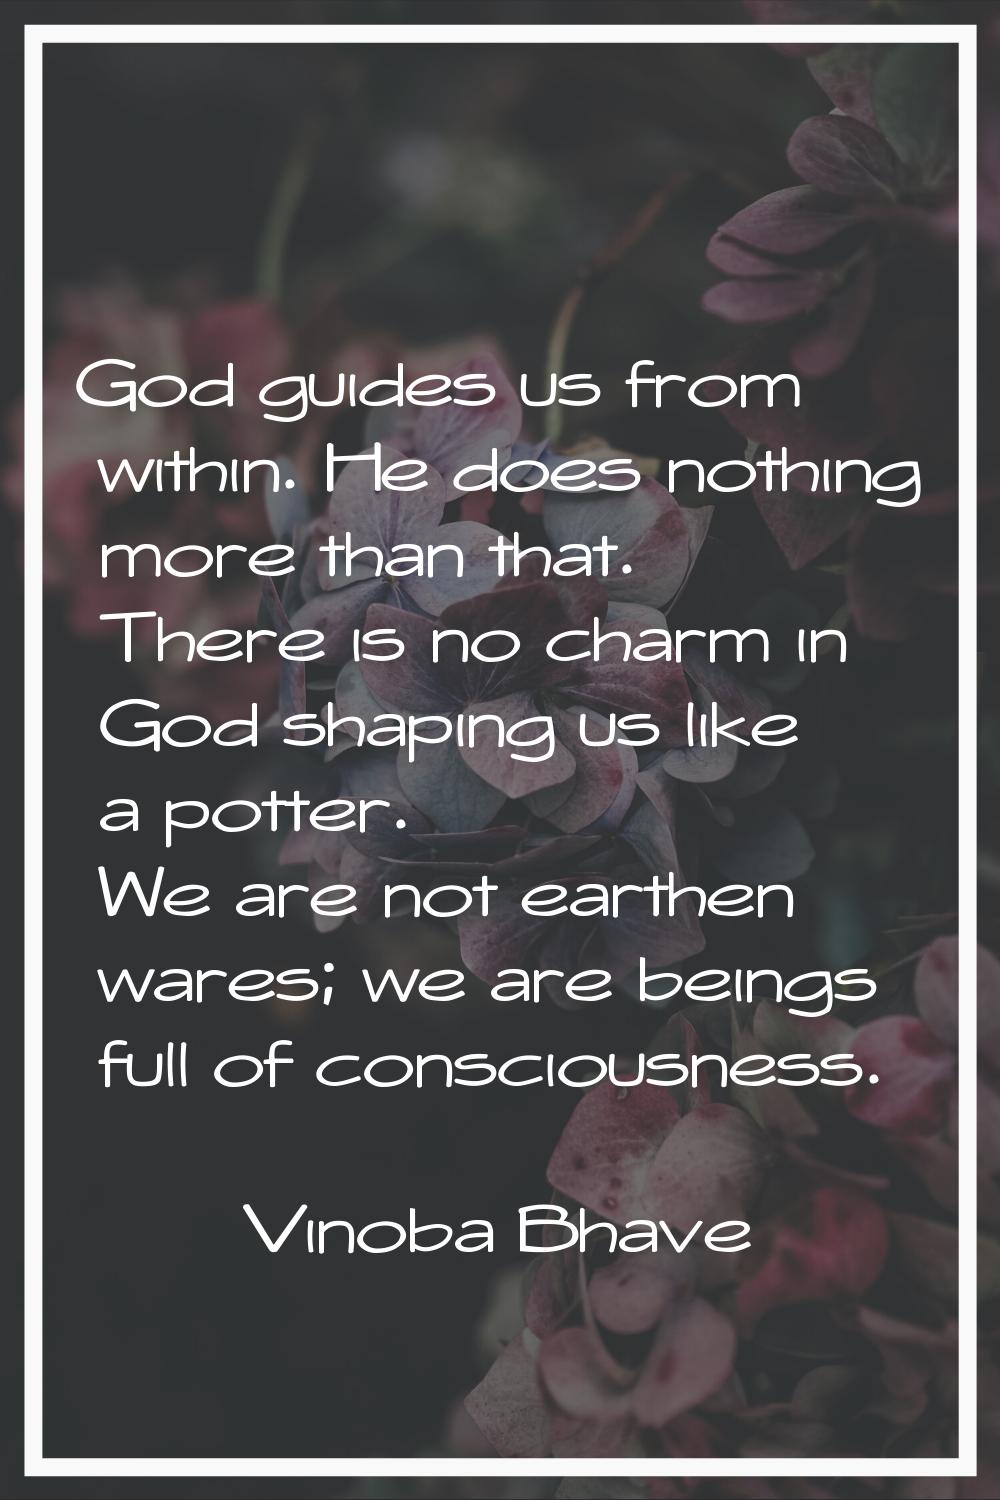 God guides us from within. He does nothing more than that. There is no charm in God shaping us like